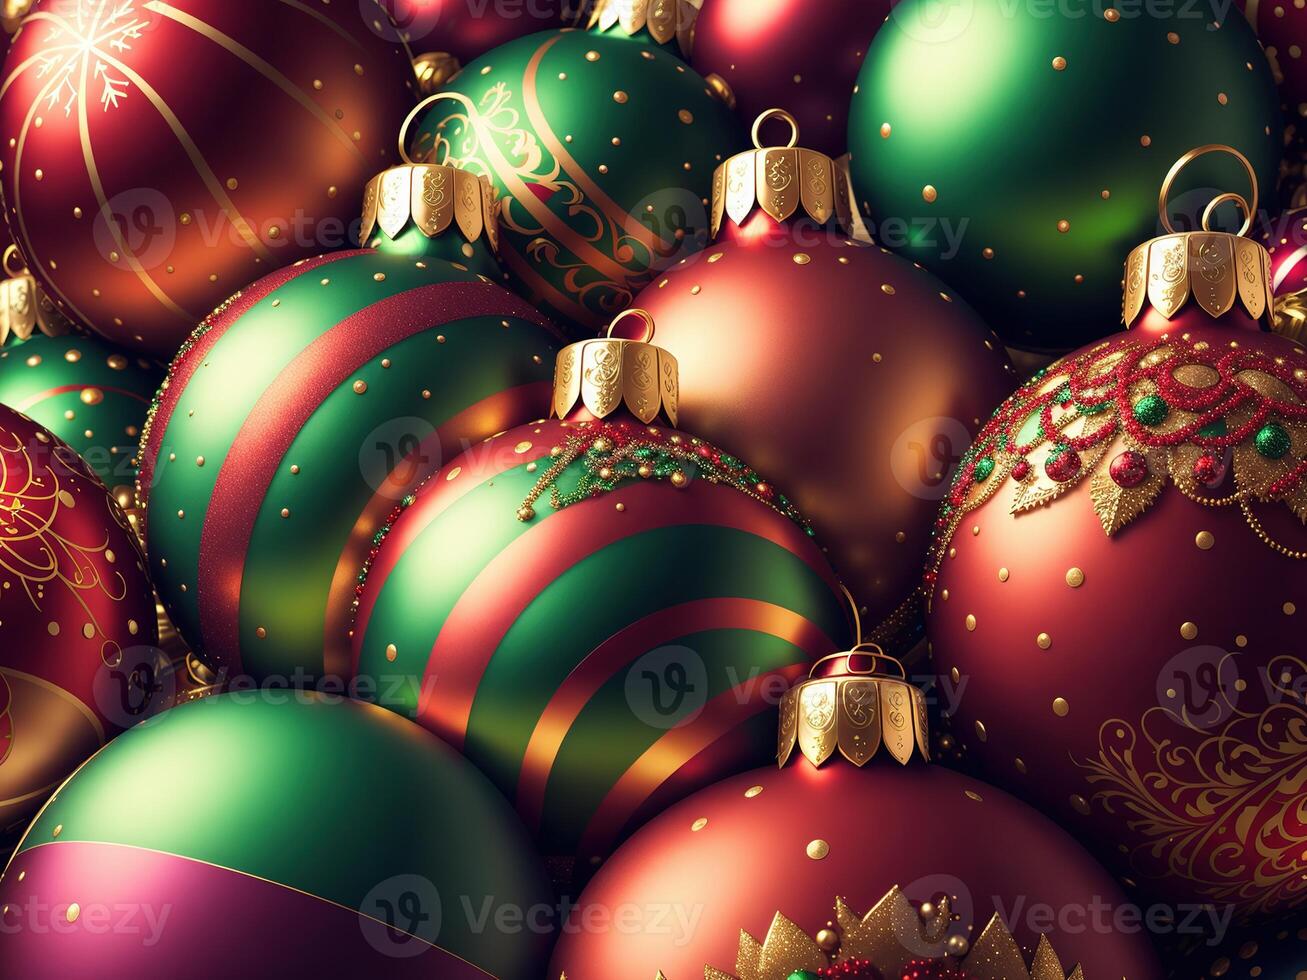 christmas balls with complex ornaments closeup by photo